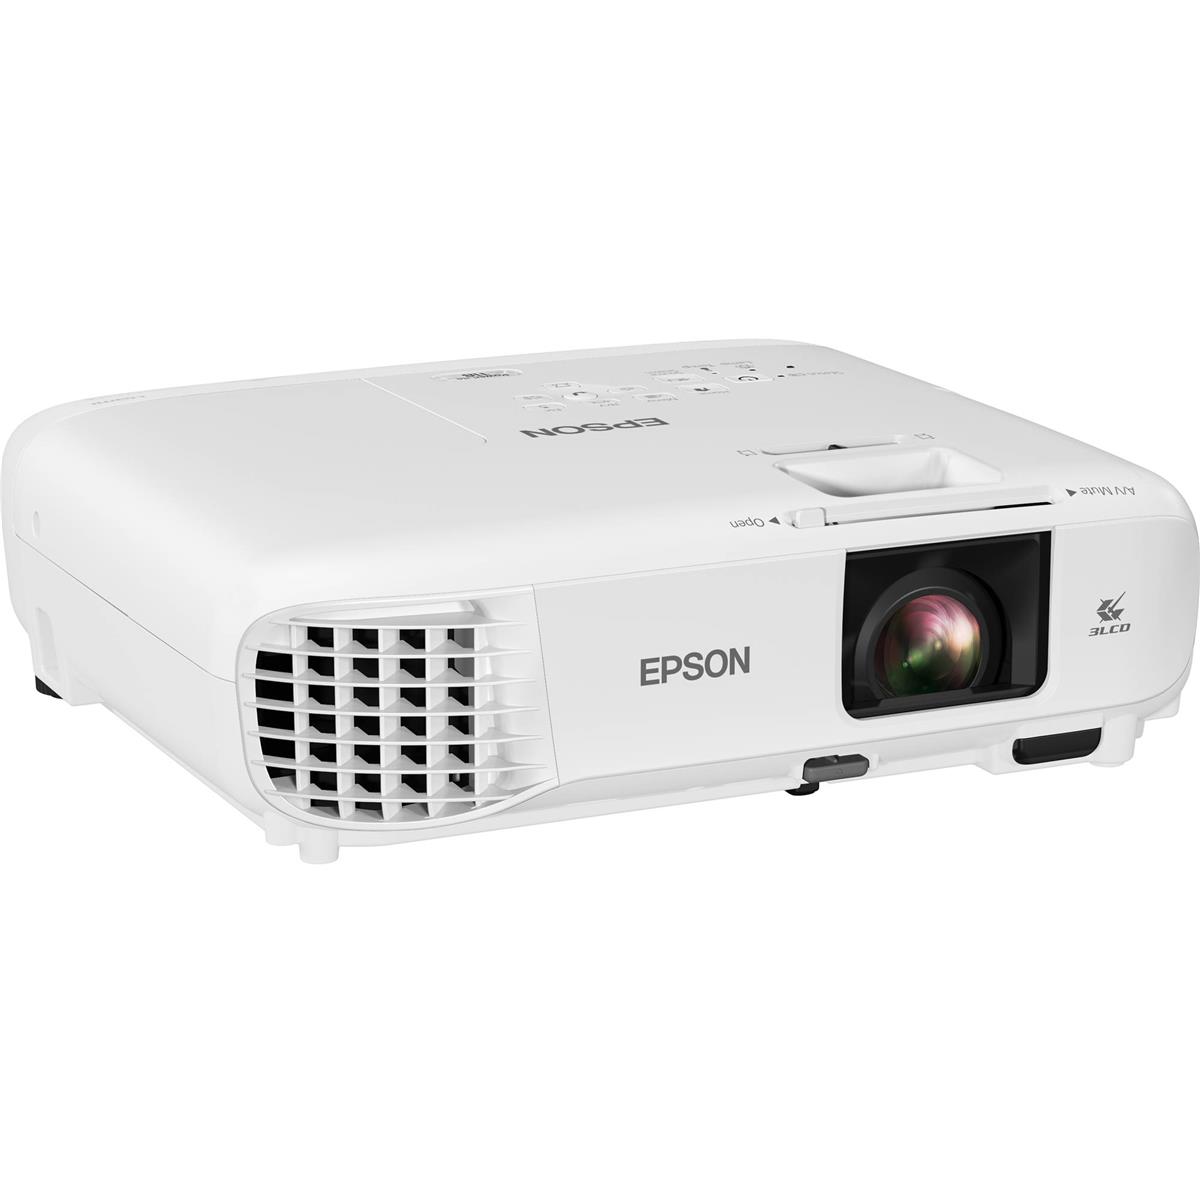 Image of Epson PowerLite 118 XGA 3LCD Classroom Projector with Dual HDMI Ports